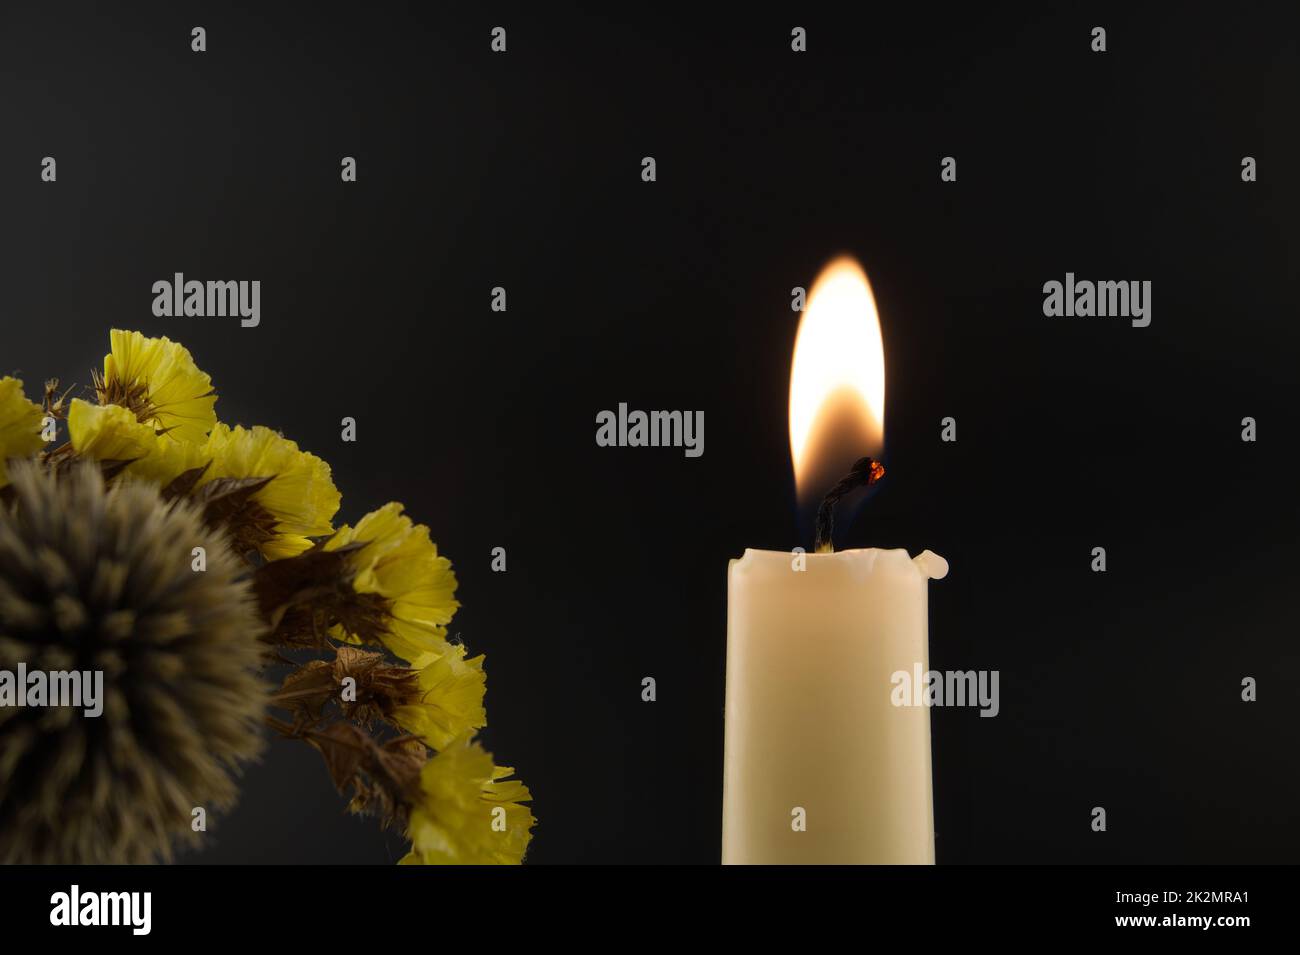 Candle flame and flowers against a black background Stock Photo